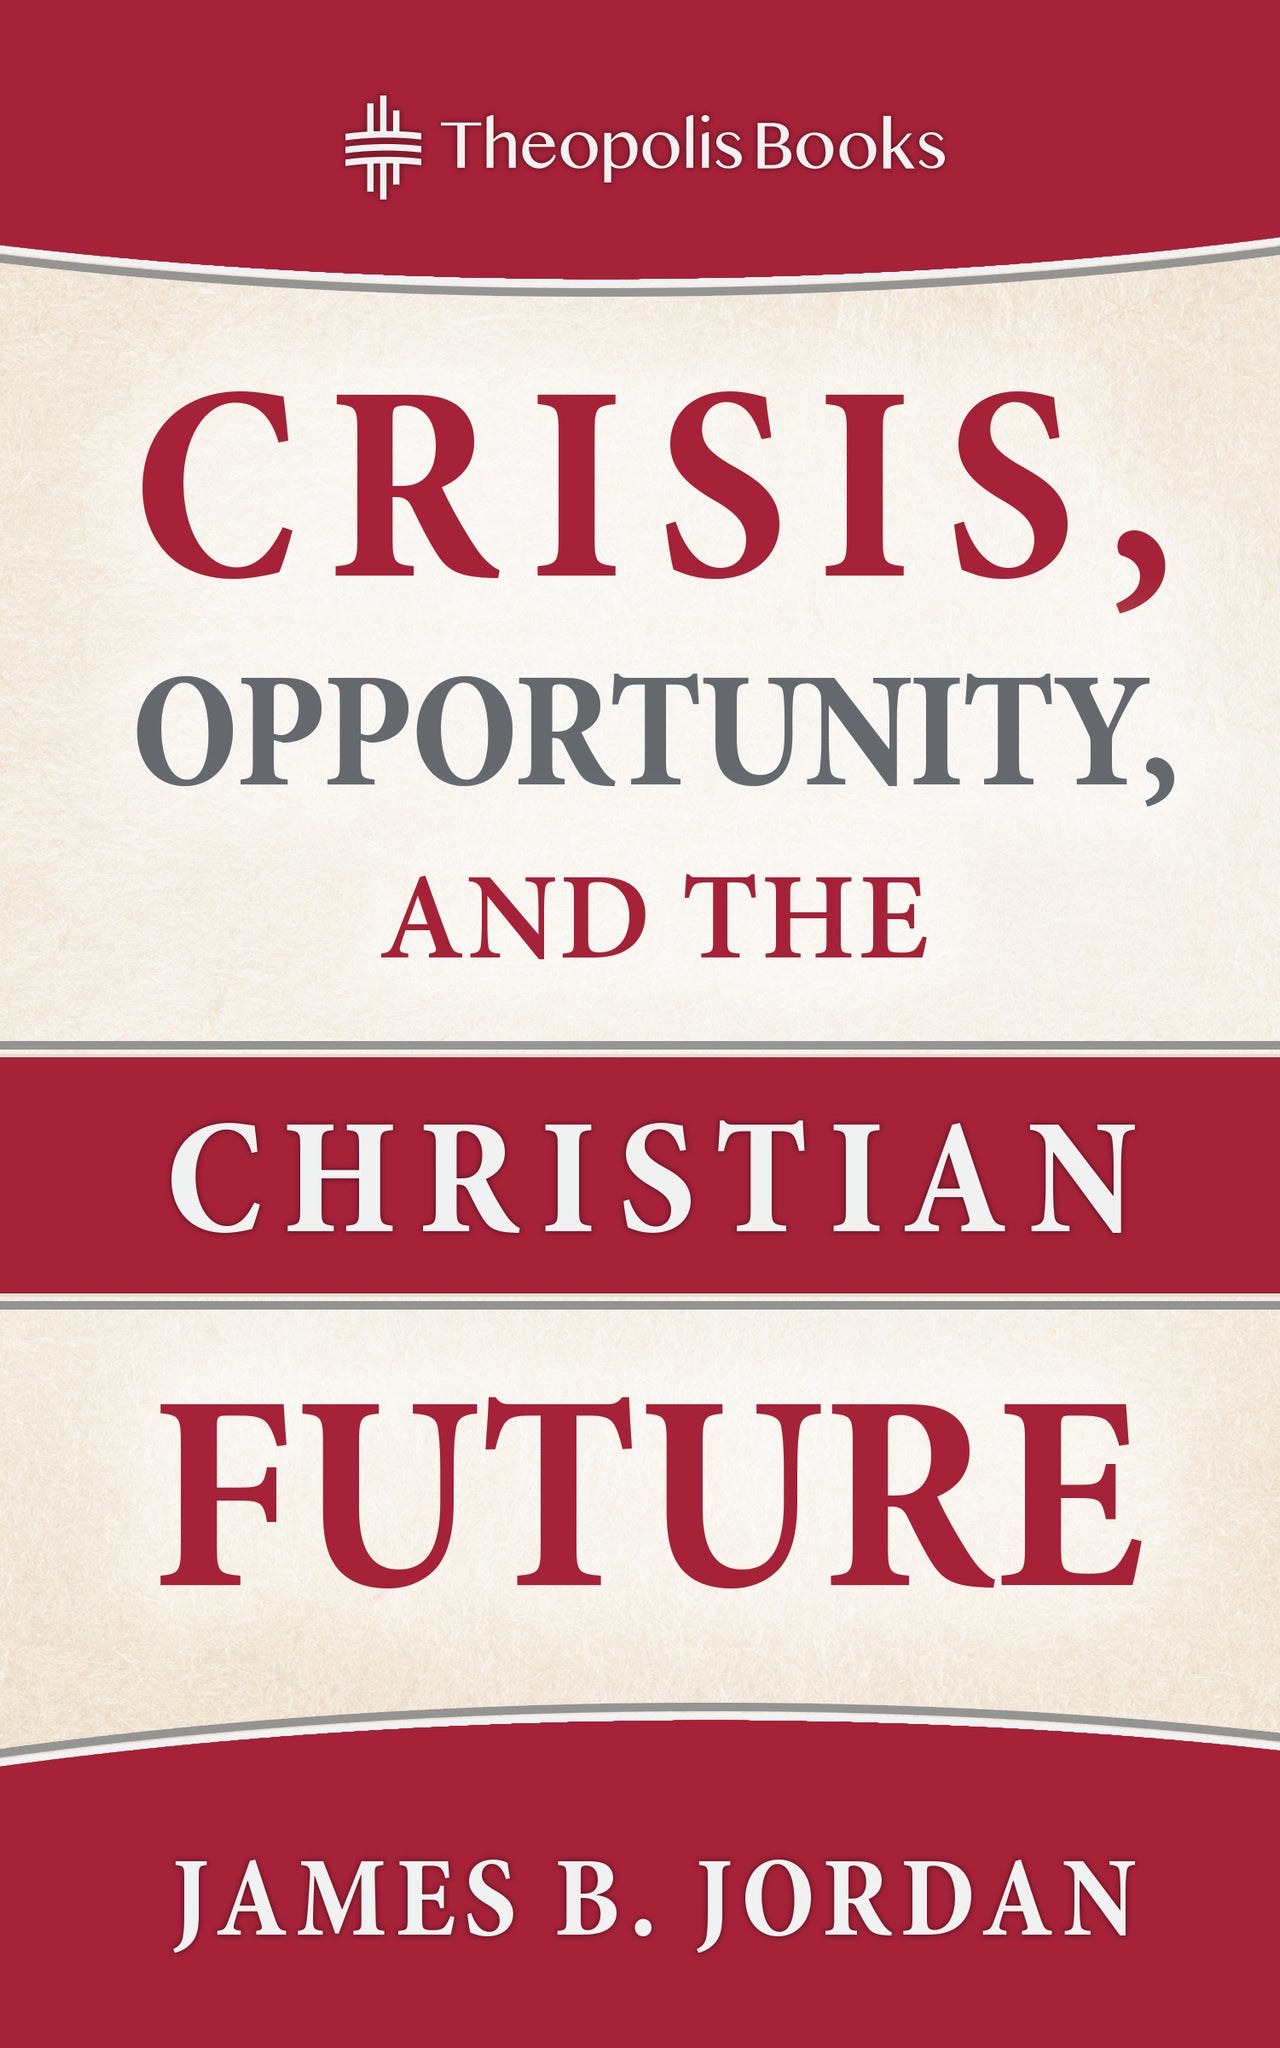 Crisis, Opportunity, and the Christian Future (Theopolis Books)